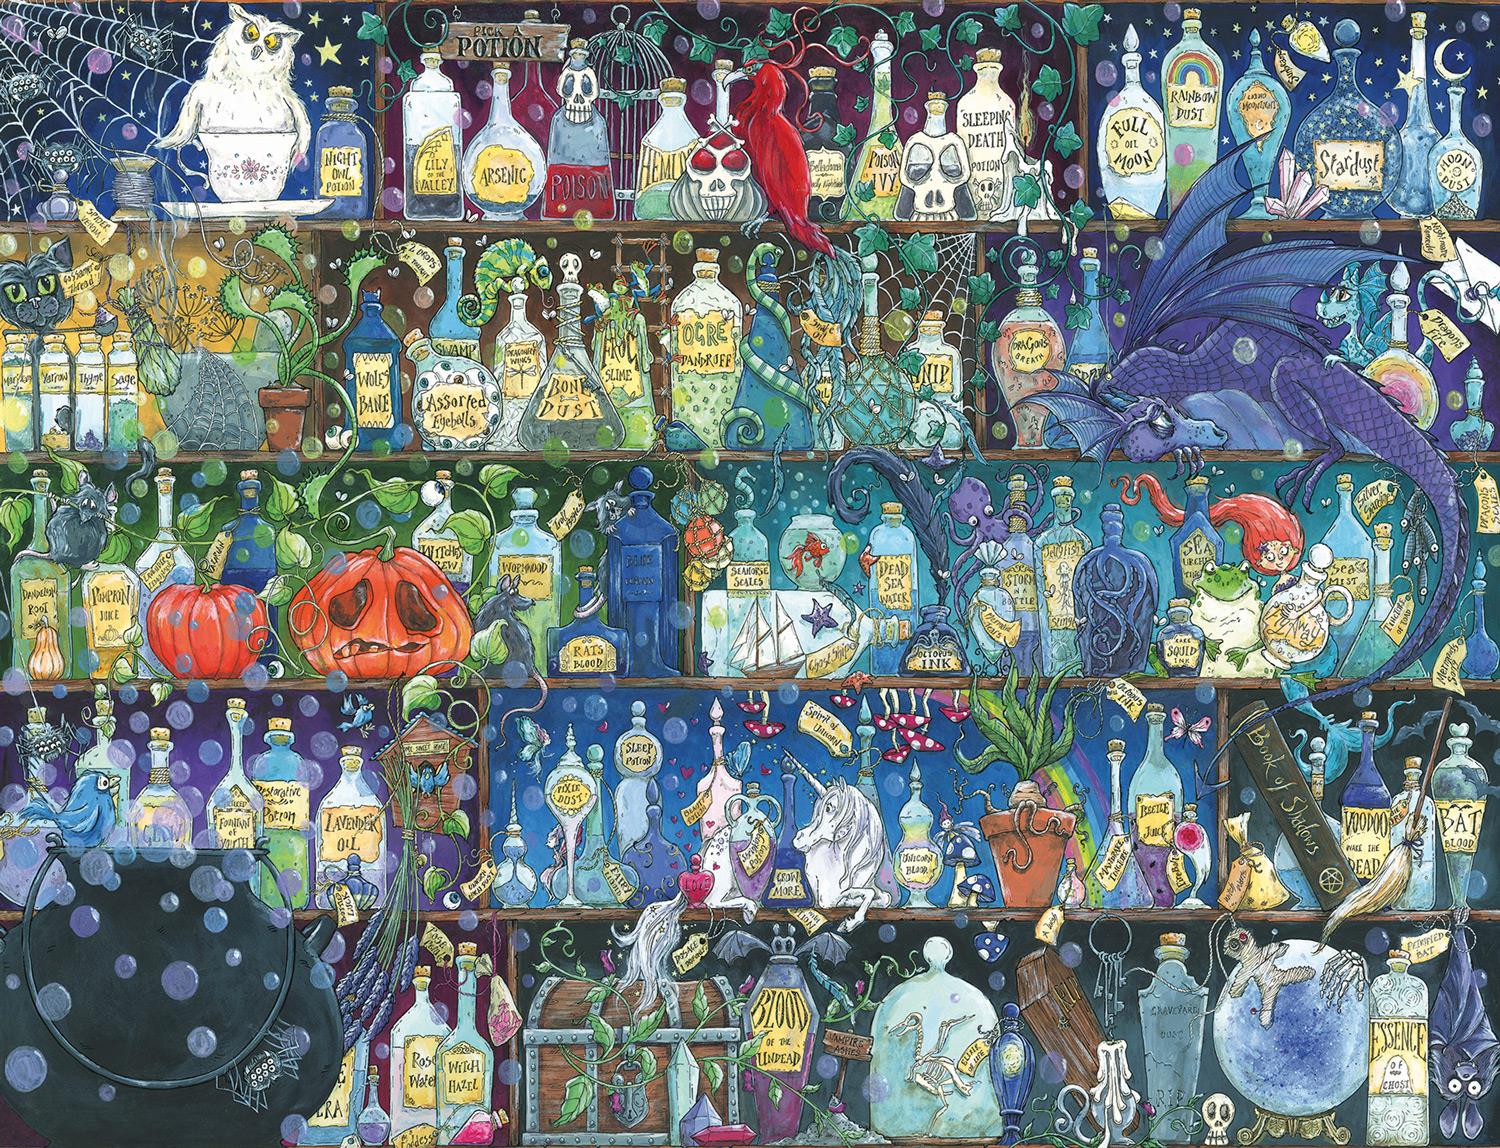 Ravensburger Poisons And Potions Jigsaw Puzzle (2000 Pieces)